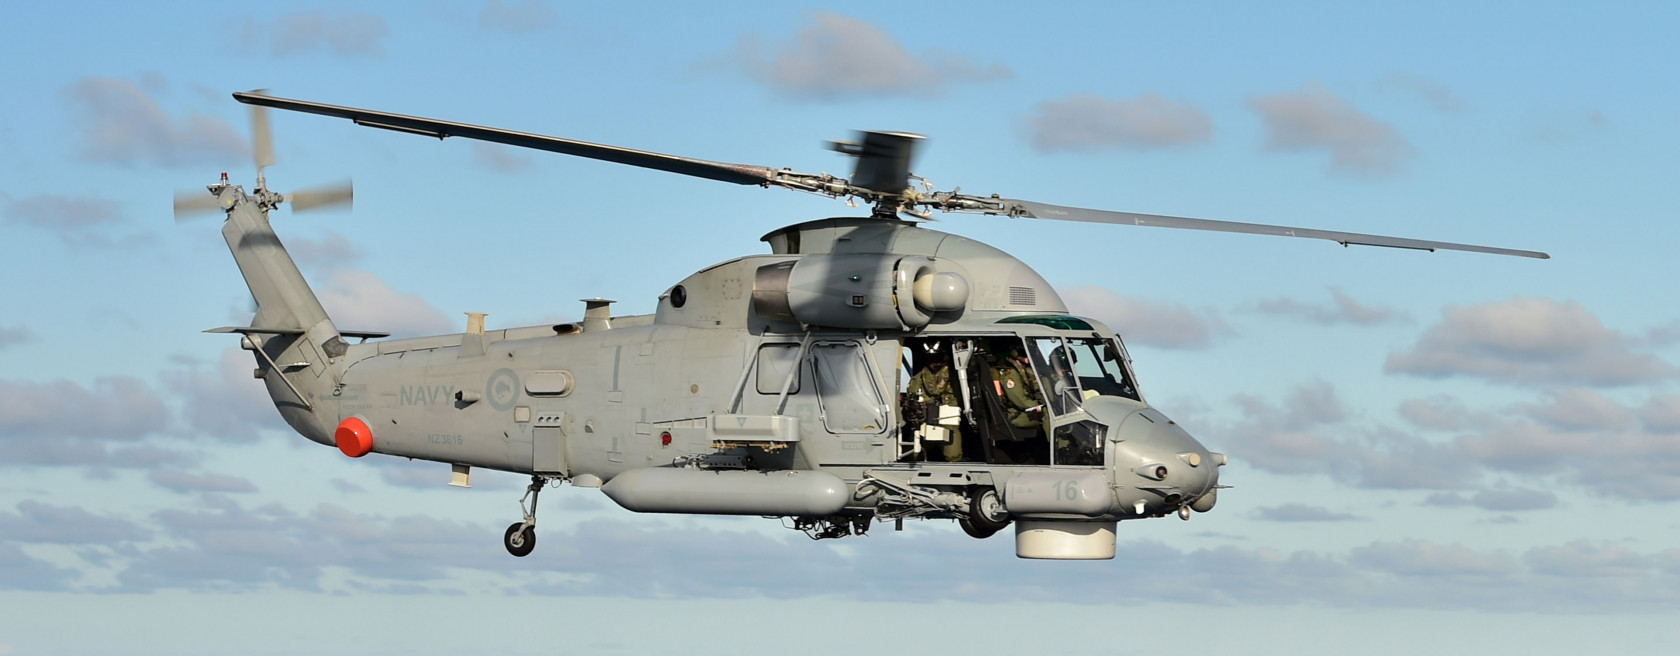 navy helicopter loadmaster full width 02